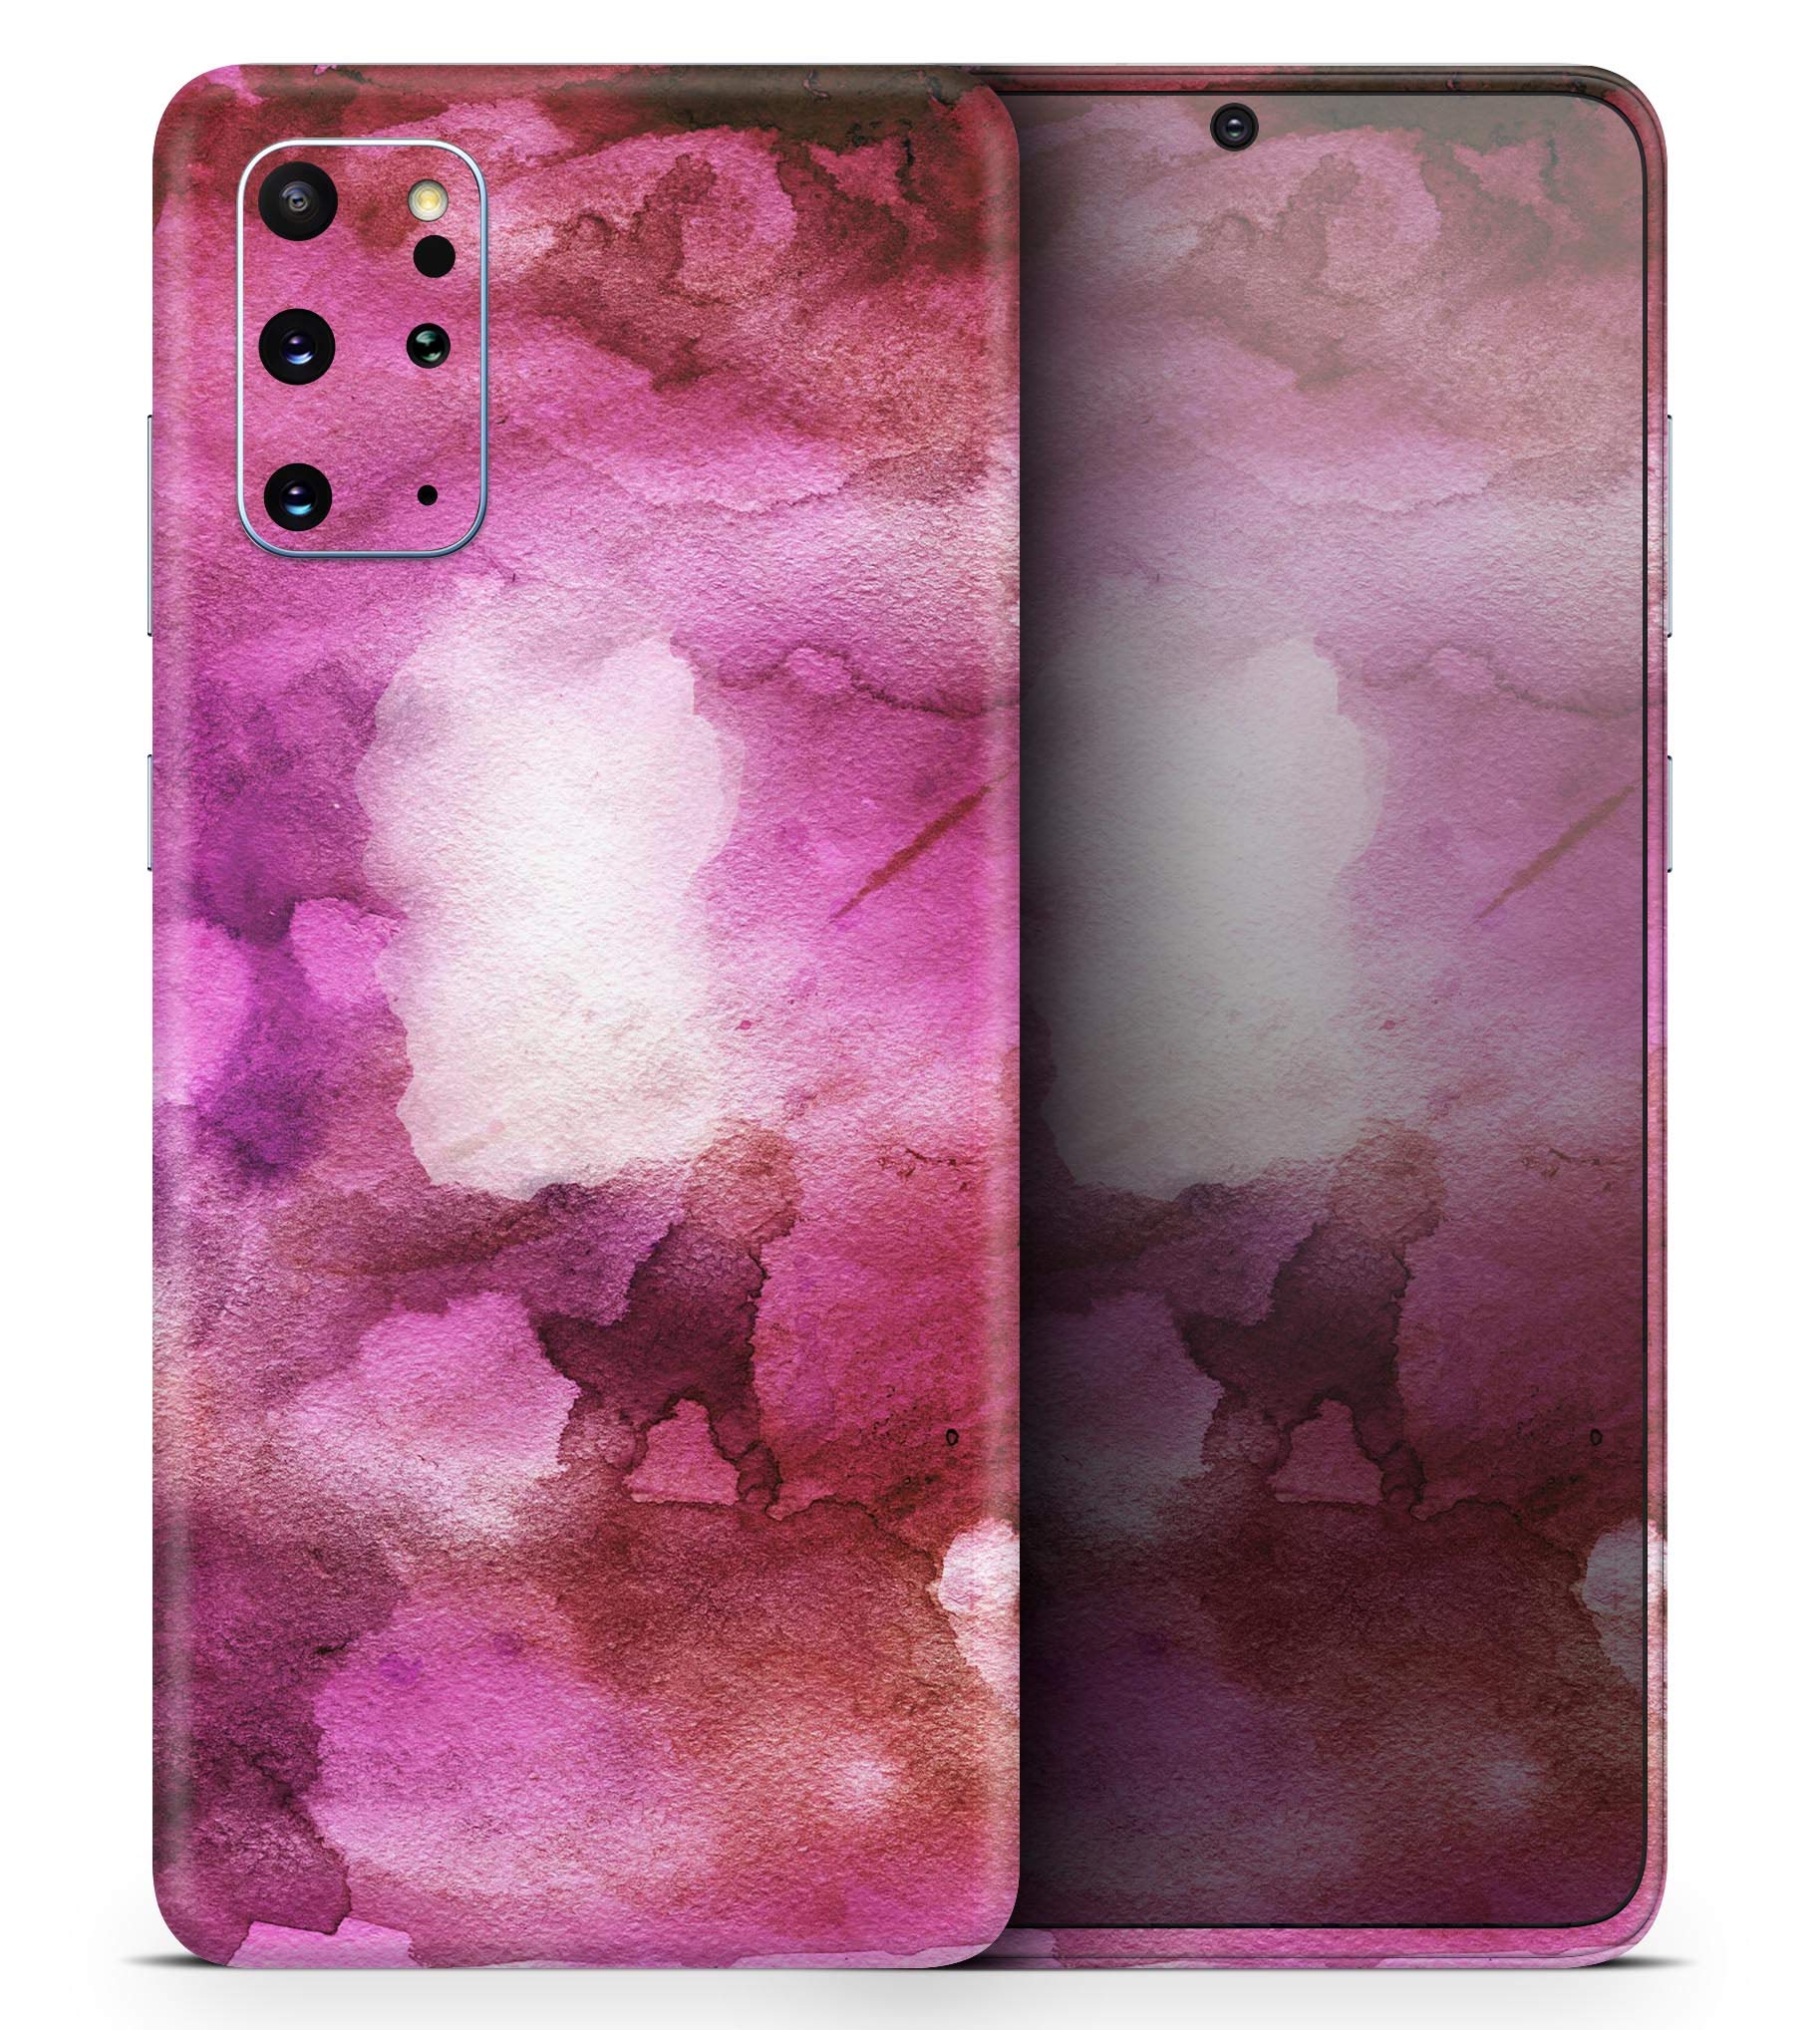 Design Skinz Pink 72 Absorbed Watercolor Texture | Protective Vinyl Decal Wrap Skin Cover Compatible with The Samsung Galaxy Note 8 (Full-Body, Screen Trim & Back Glass Skin)